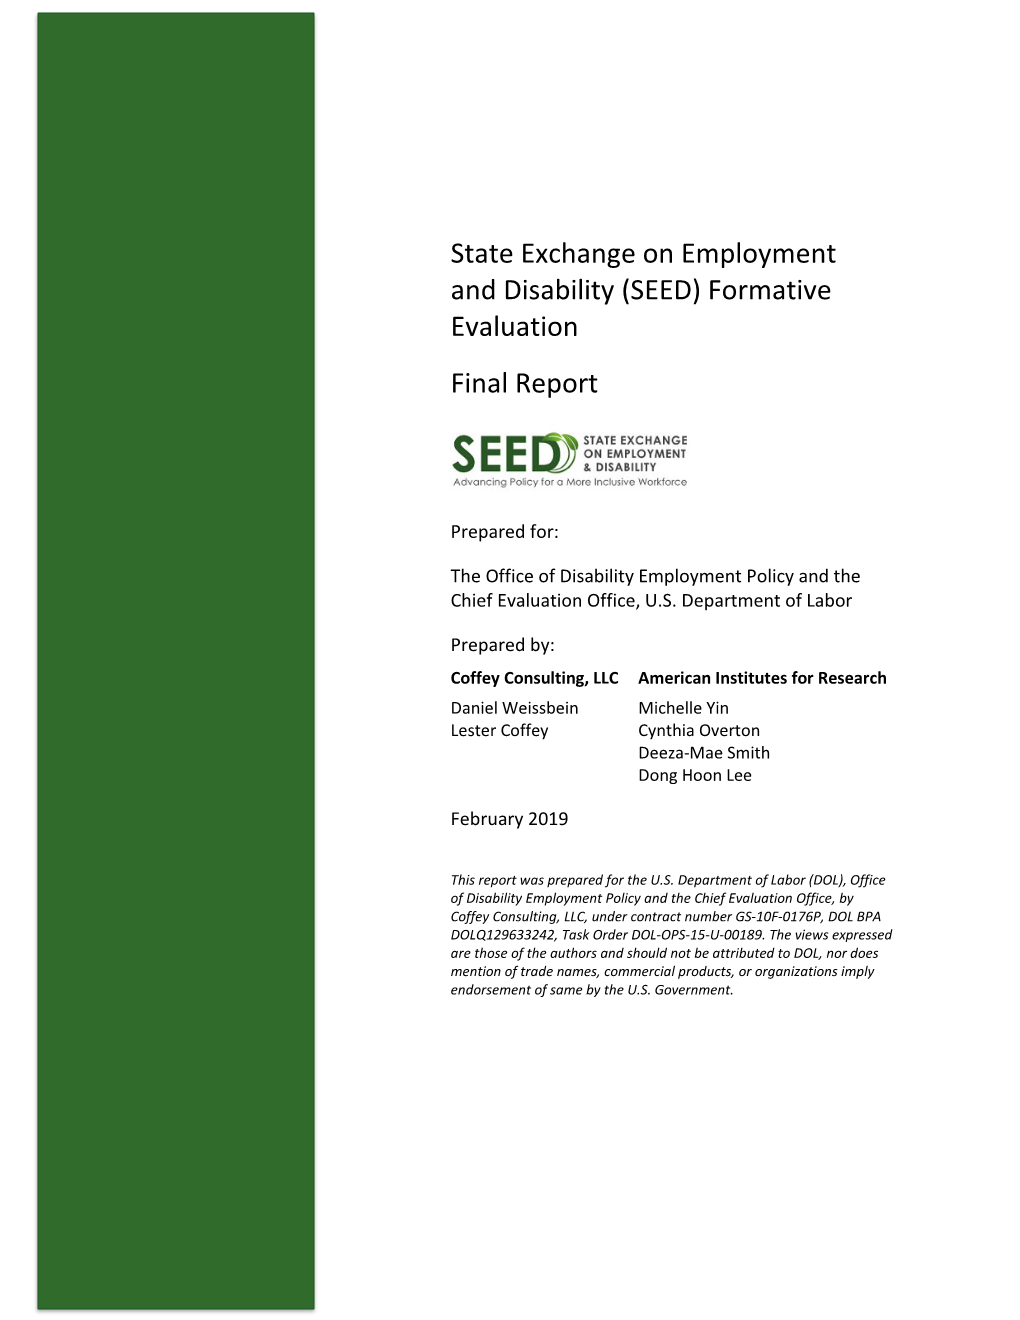 State Exchange of Employment and Disability (SEED) Evaluation